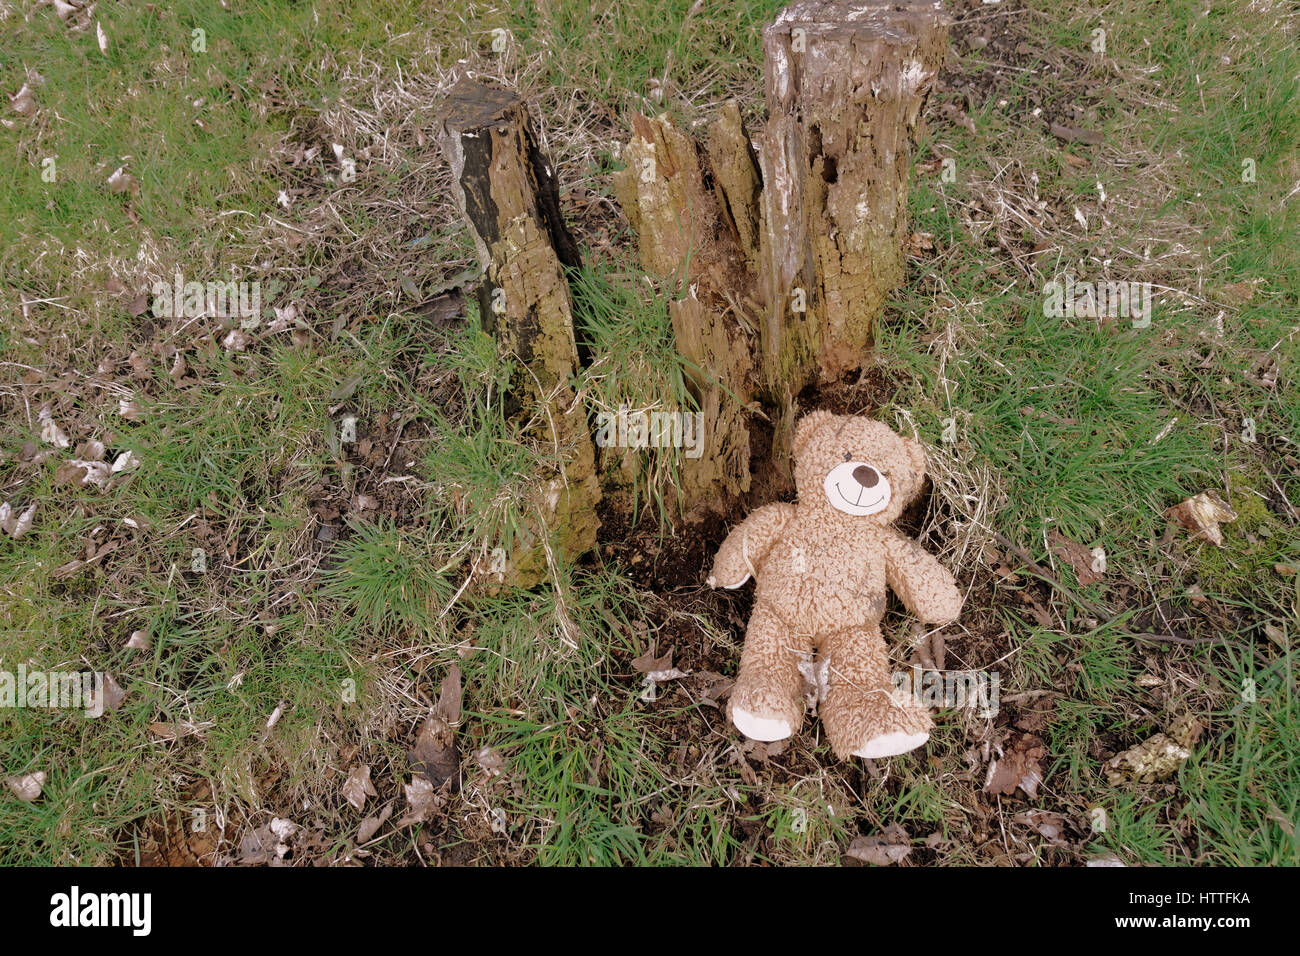 conceptual childhood picture teddy bear danaged tree stump Stock Photo